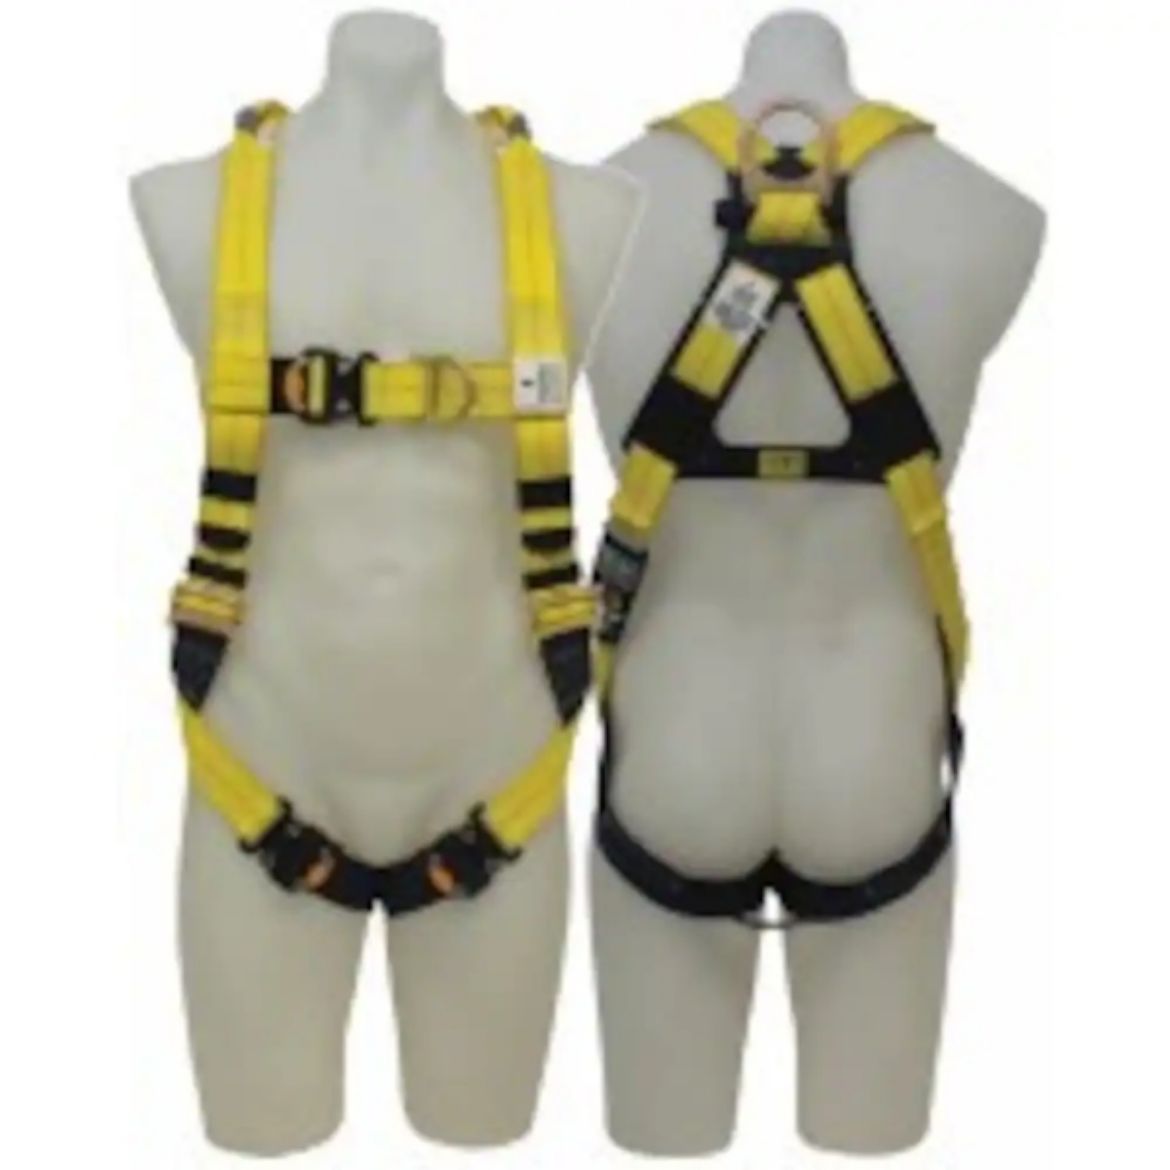 Picture of 803M0054 DELTA RIGGERS HARNESS - MEDIUM, WITH REAR STAND UP D-RING, FRONT FALL ARREST D-RING, QUICK CONNECT BUCKLES & CONFINED SPACE LOOPS